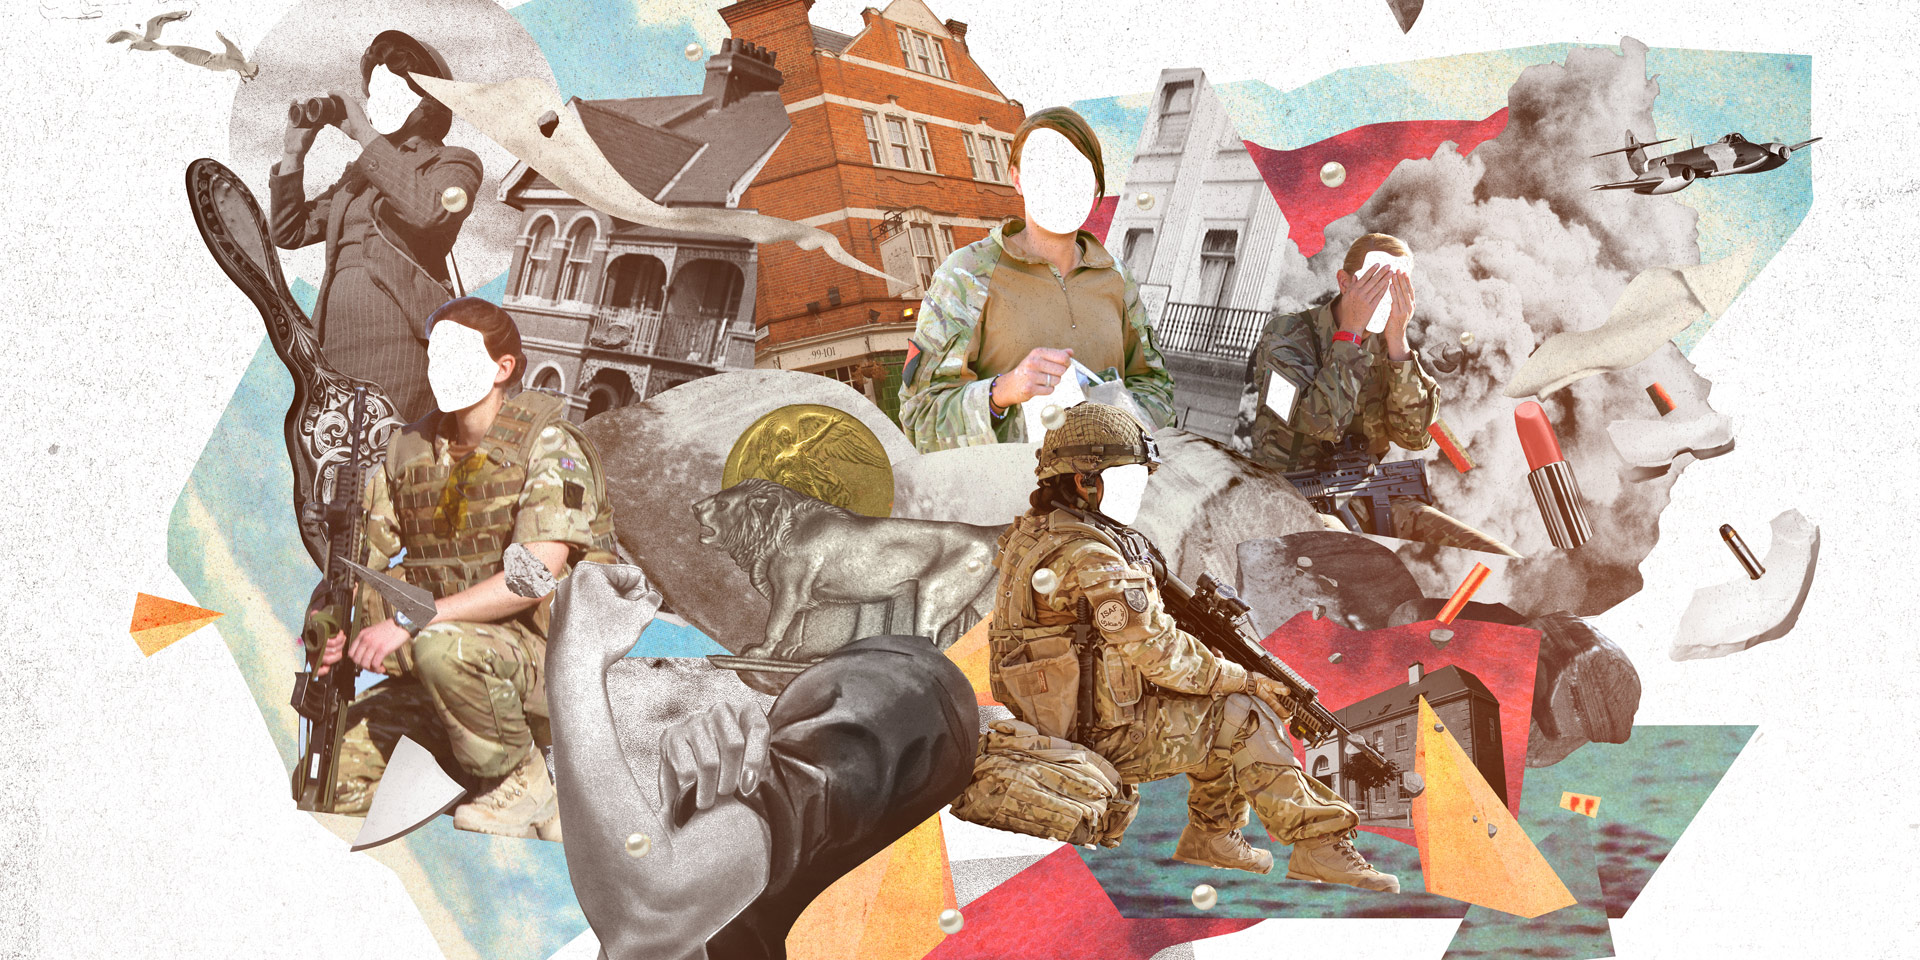 Illustration for the Women Soldiers programme